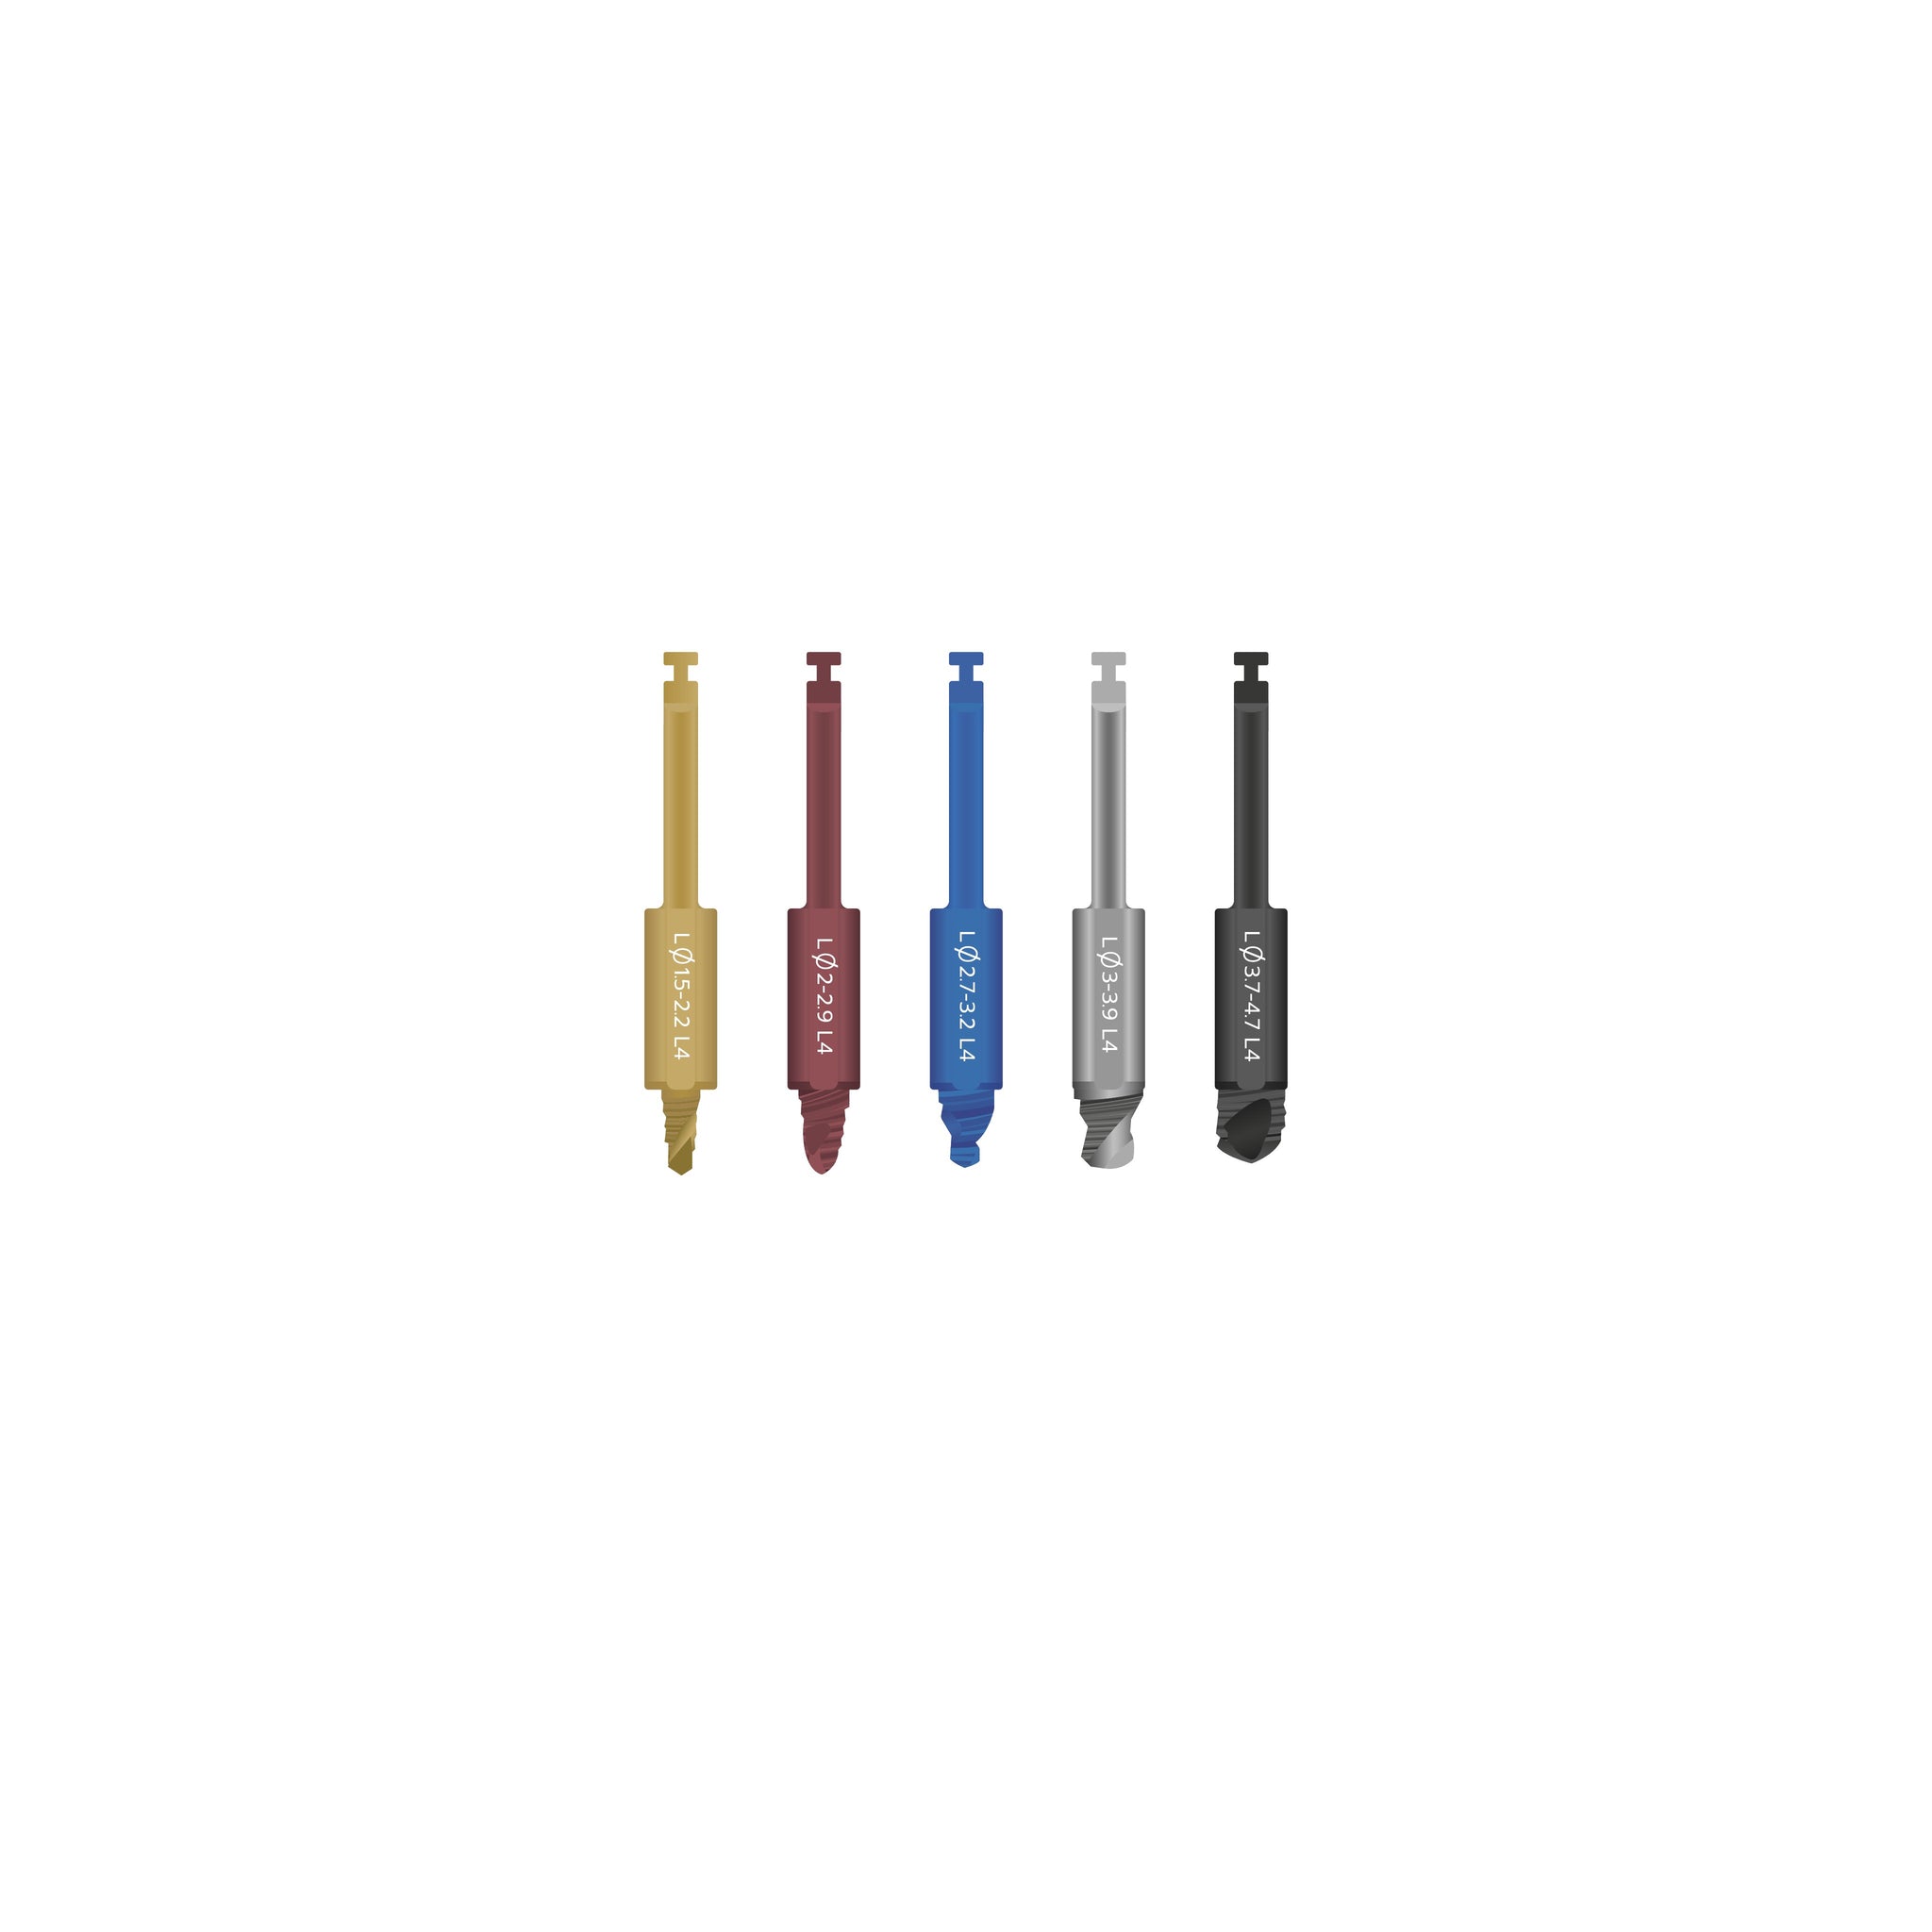 5 metal drills, all 4 millimeters long. From left to right, they are gold, maroon, blue, silver, and black.